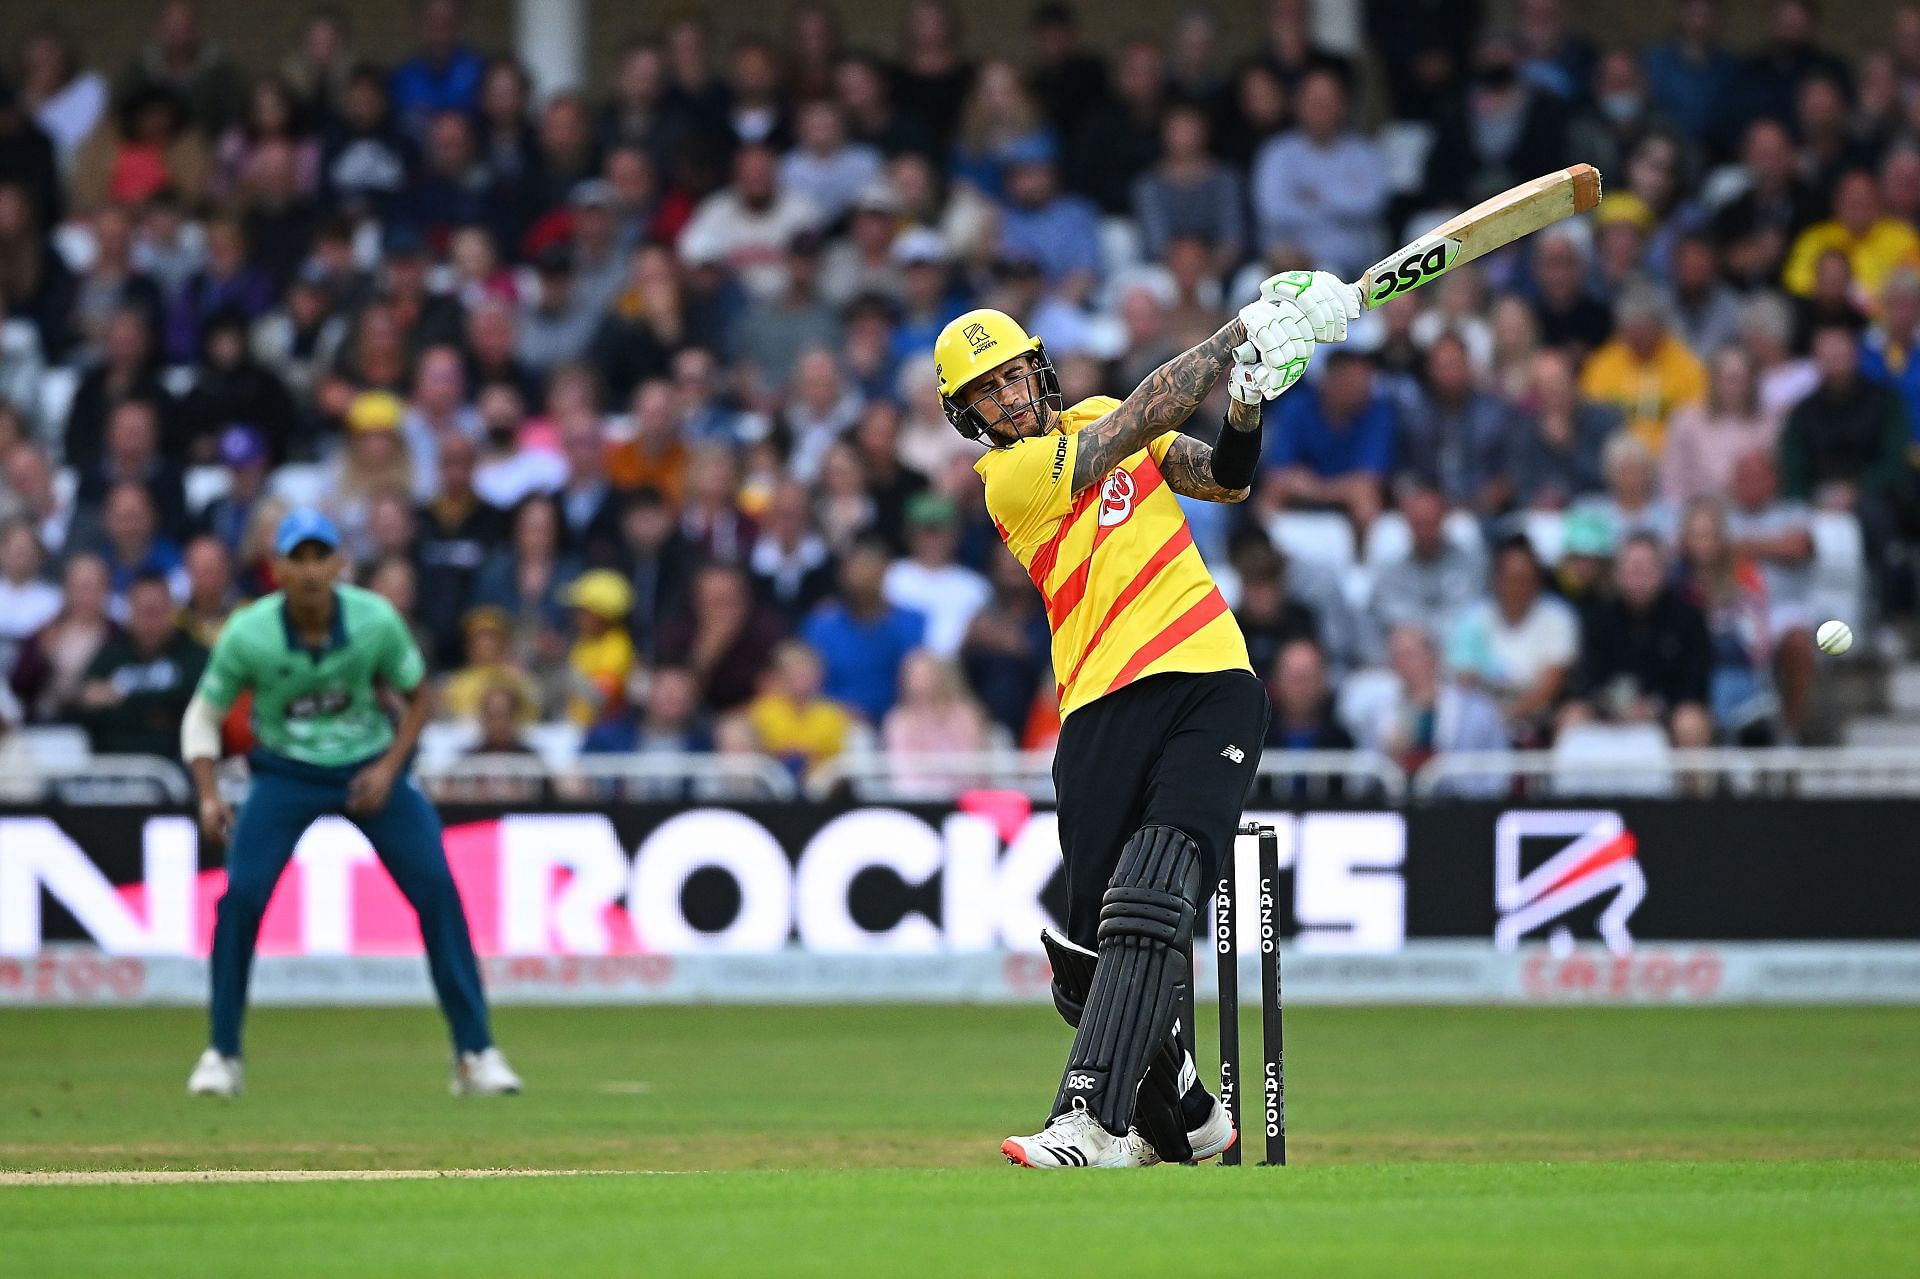 Alex Hales playing for the Trent Rockets in The Hundred. (Credits: Getty)